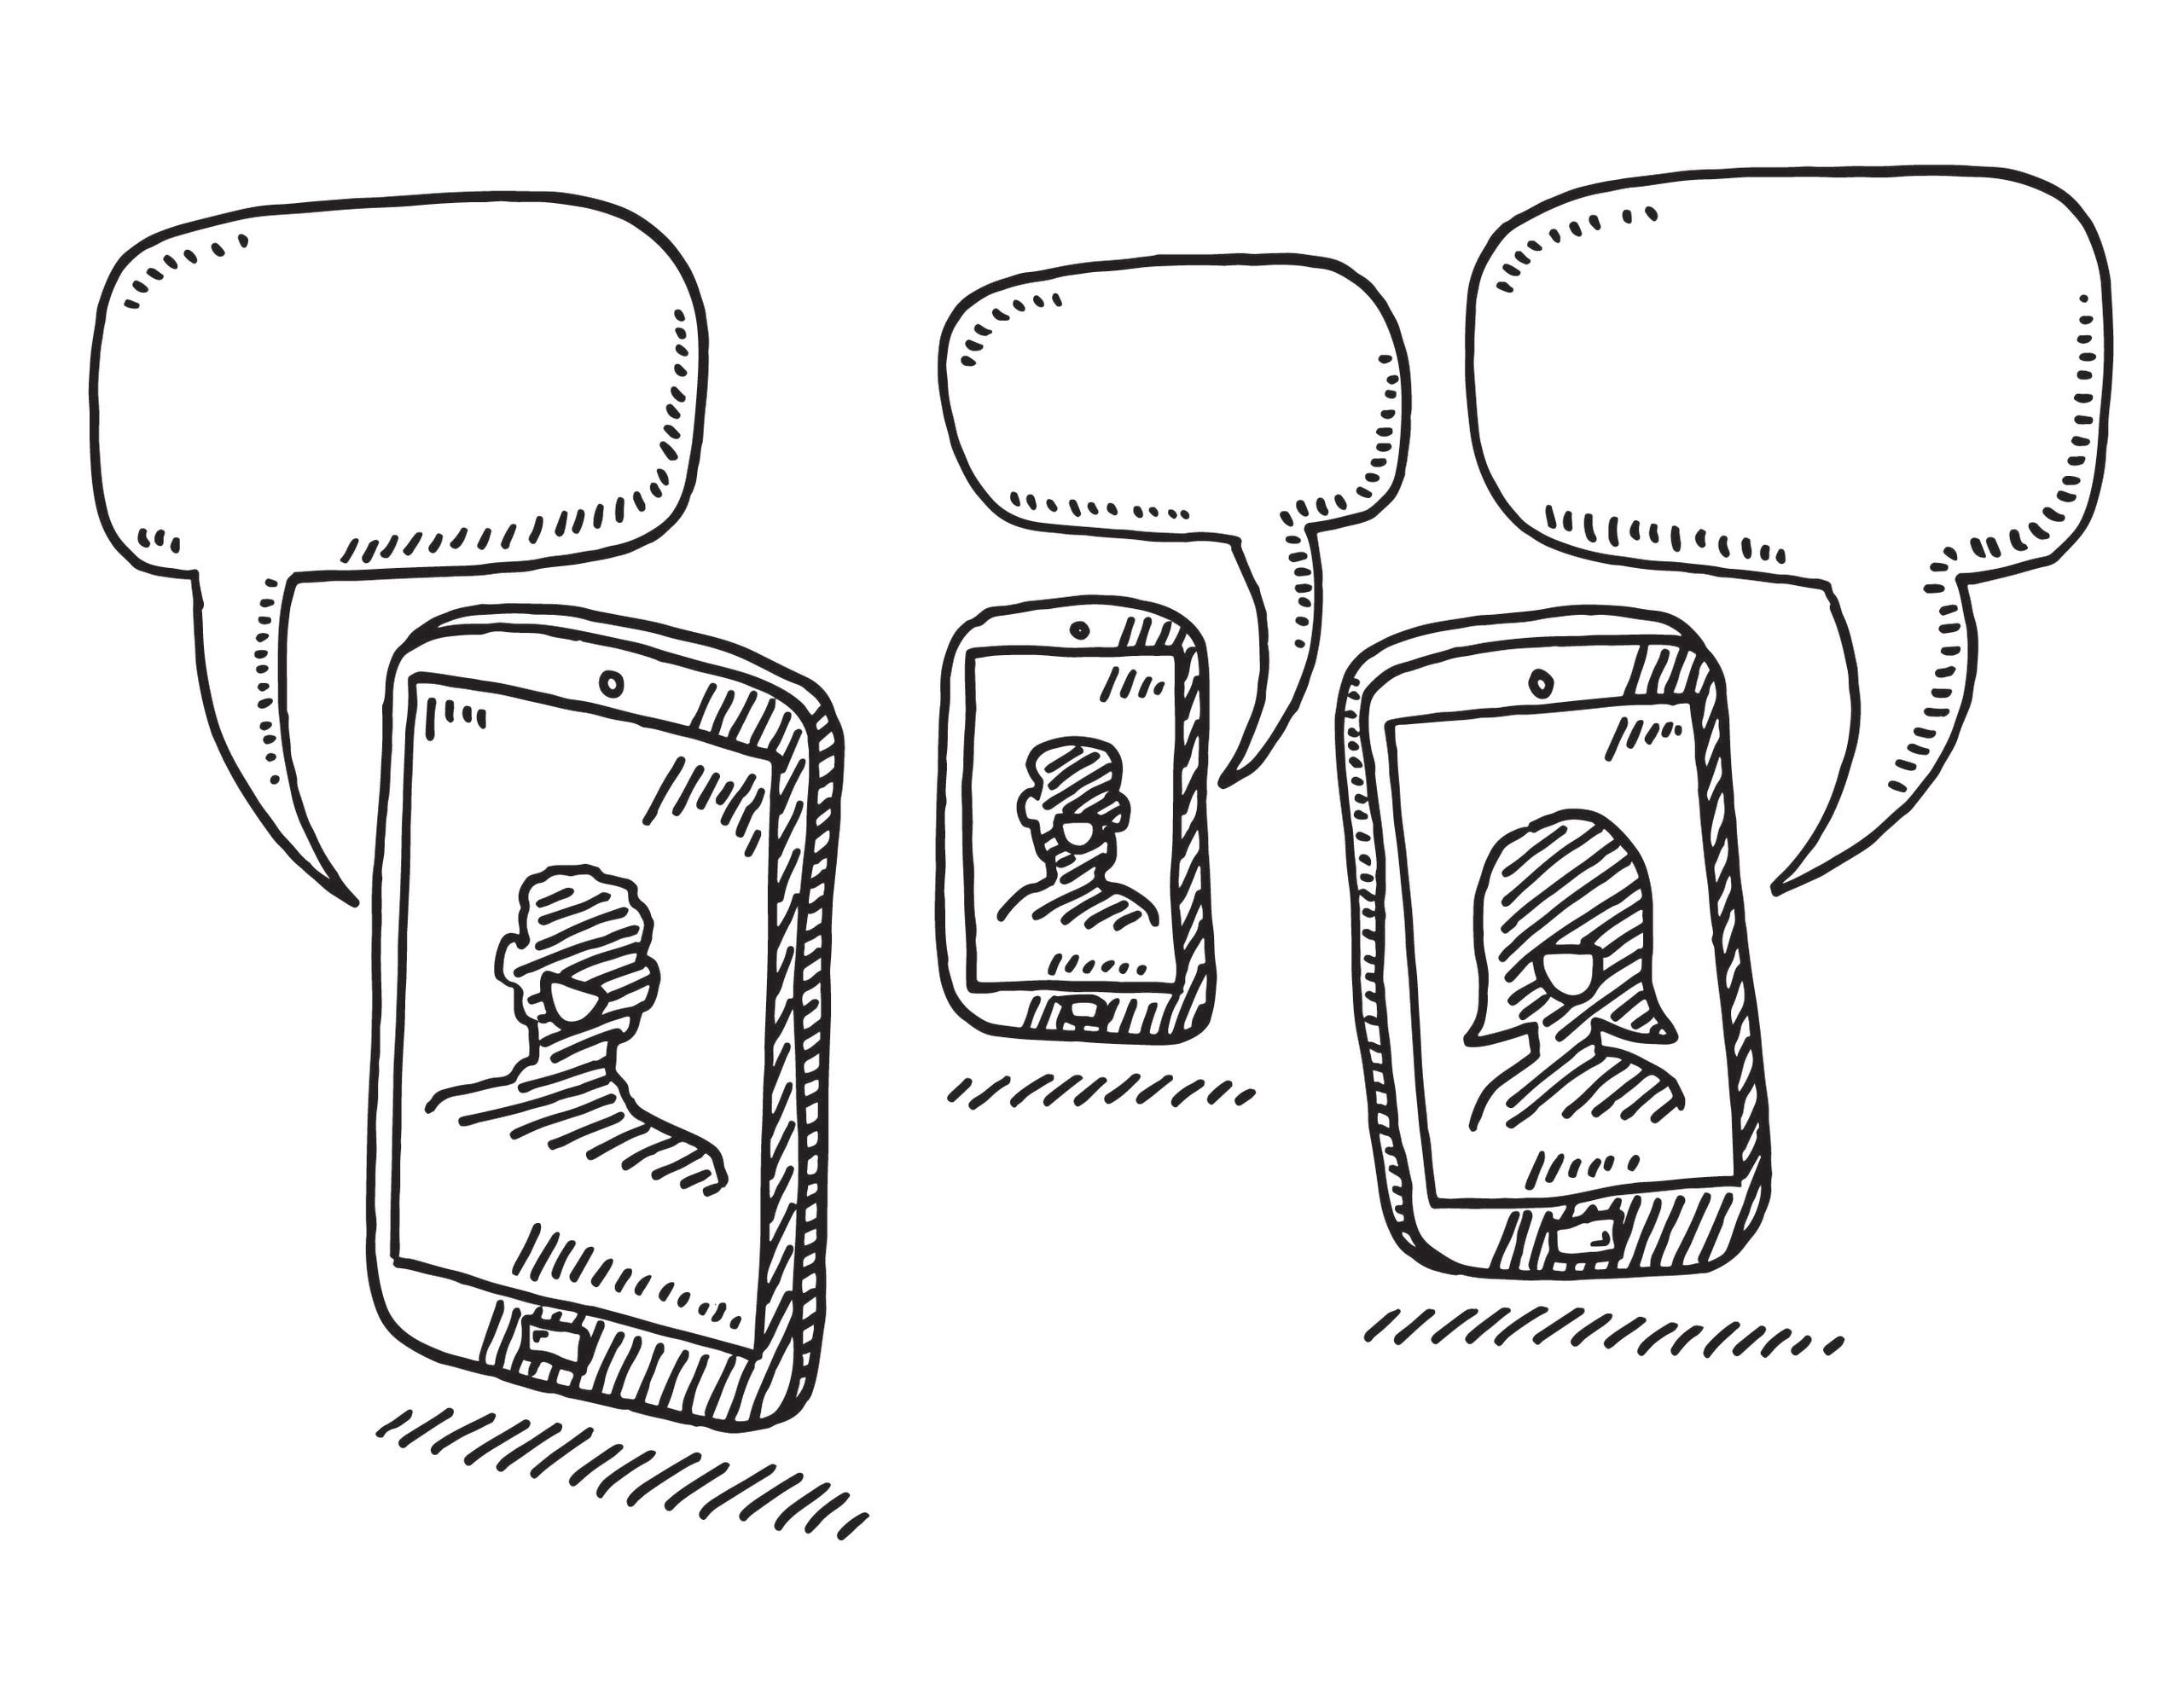 Black and white drawing on talking heads on mobile phones.